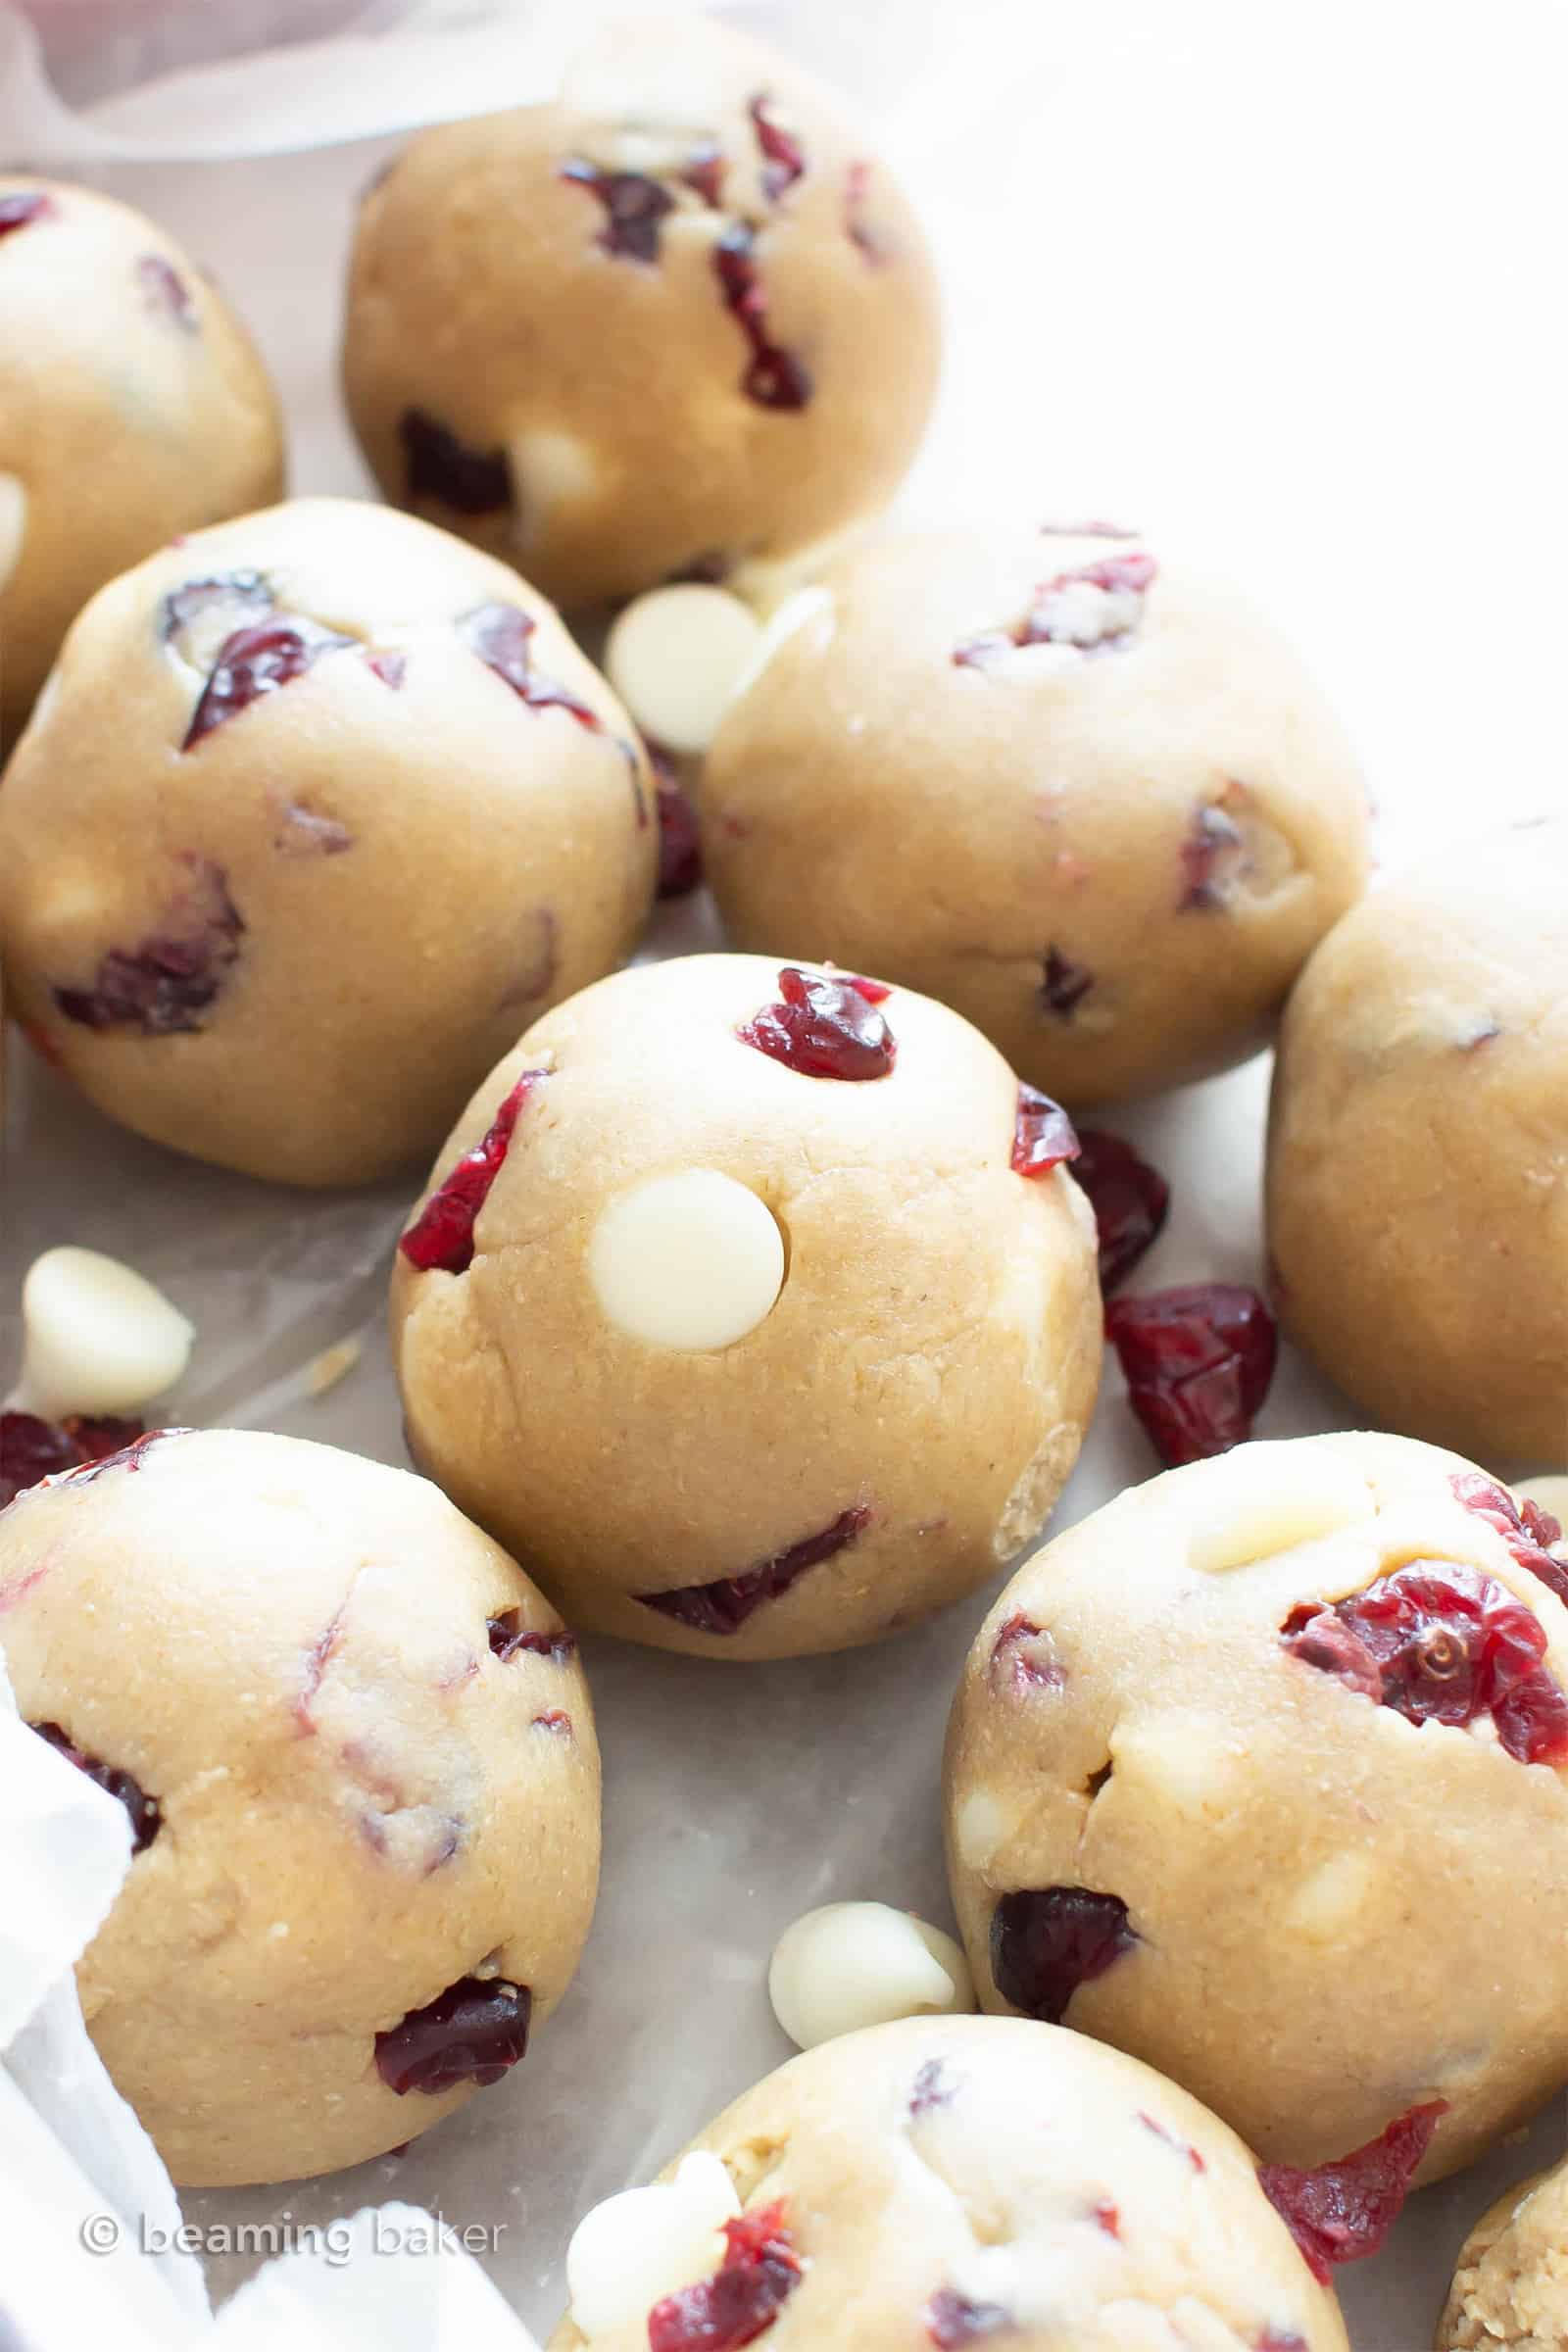 White Chocolate Cranberry Cookie Dough Bites (GF): this easy, no bake recipe for Vegan + Gluten Free cookie dough balls is deliciously sweet & tart! White chocolate chips & dried cranberries complement soft vegan cookie dough. Dairy-Free. #CookieDough #NoBake #Vegan #GlutenFree #Cranberries | Recipe at BeamingBaker.com